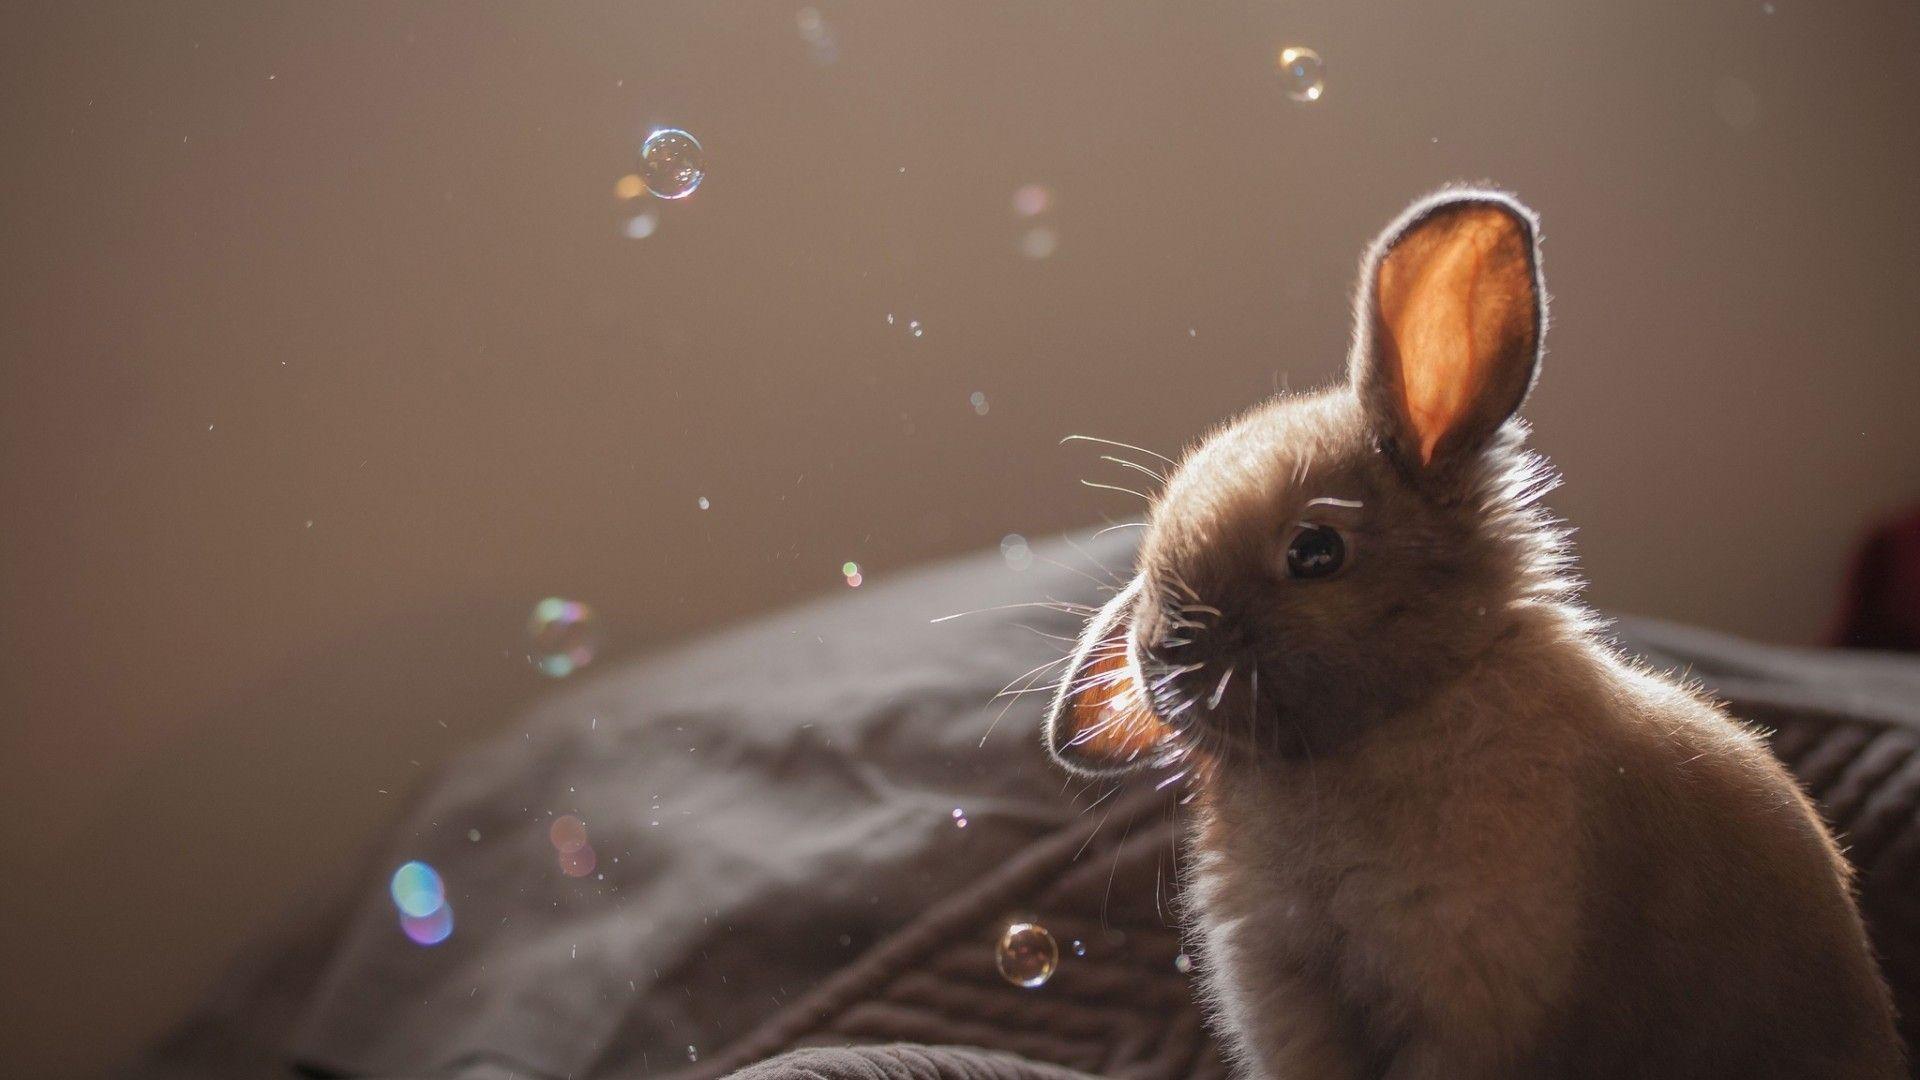 Rodent: Cute Rabbit Bubbles Brown Bunny Background Desktop Rodents